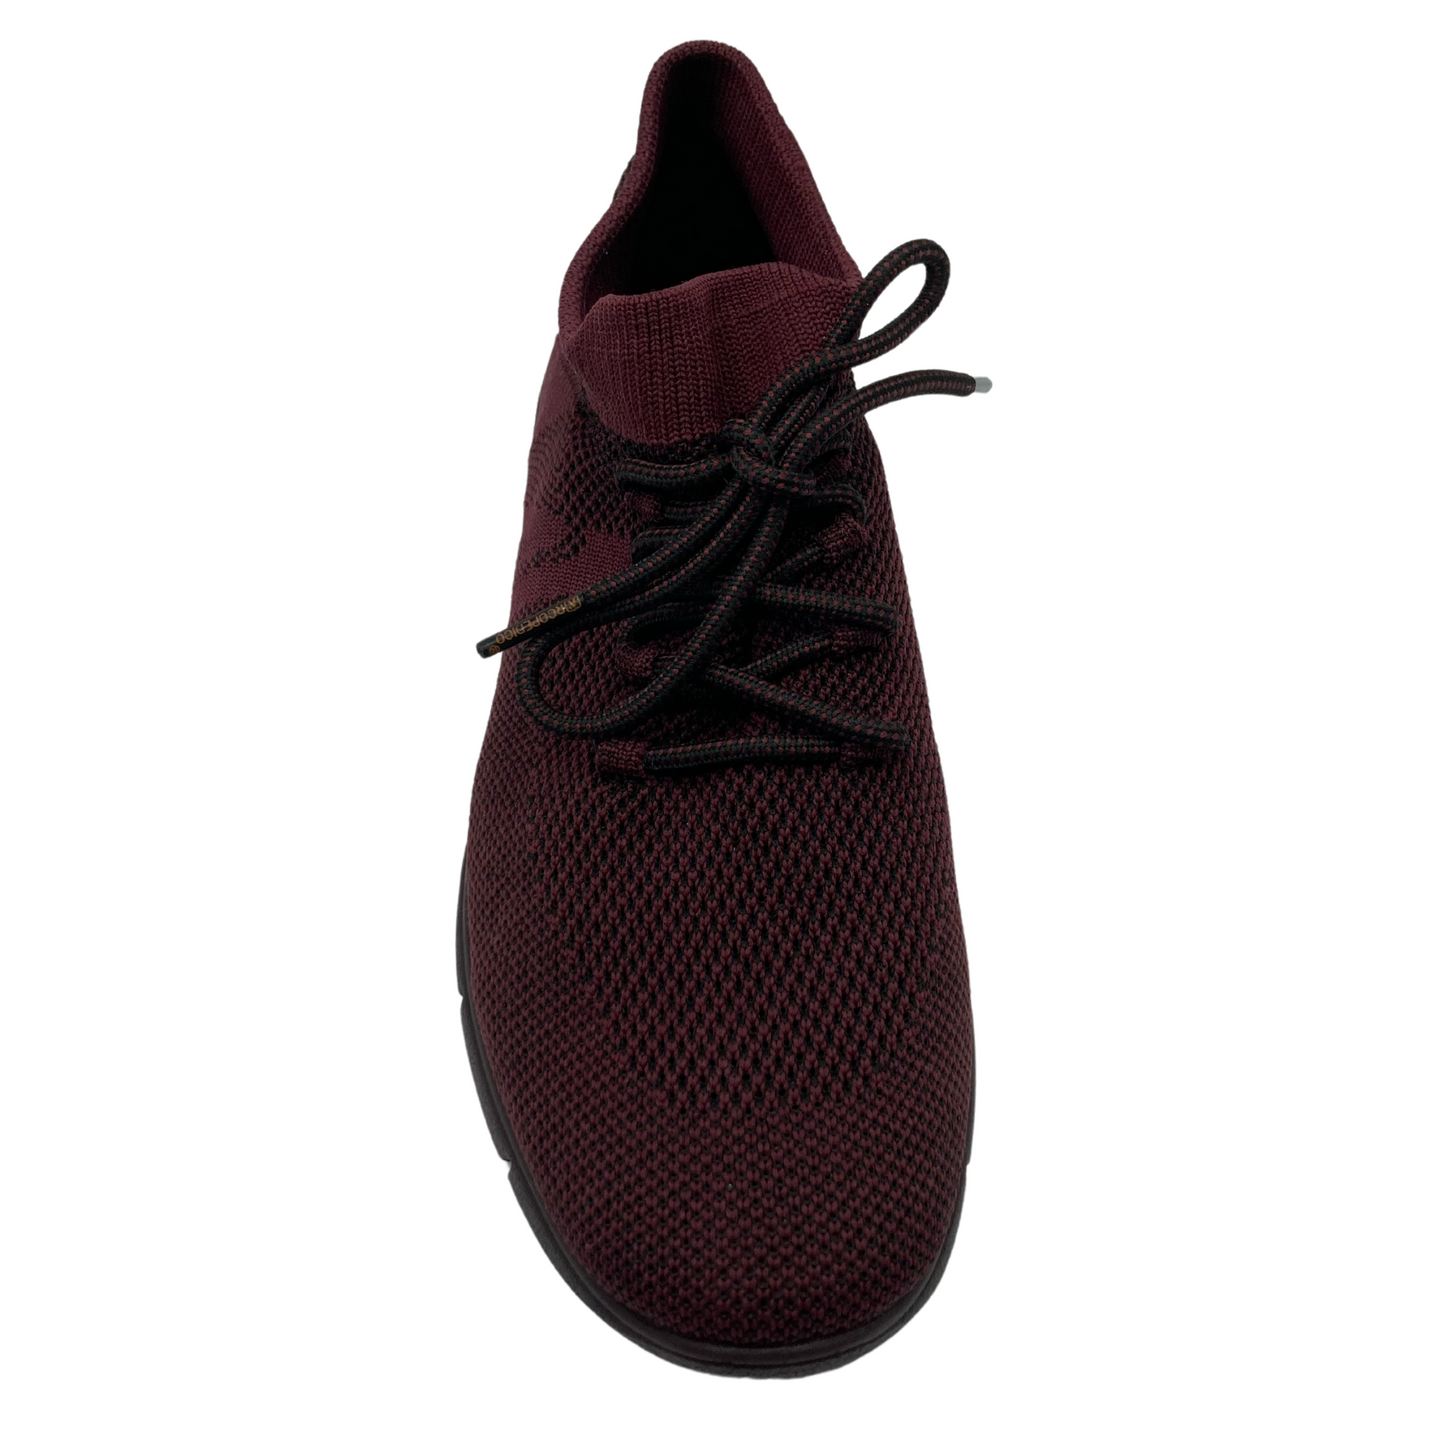 Top view of burgundy mesh sneaker with matching laces